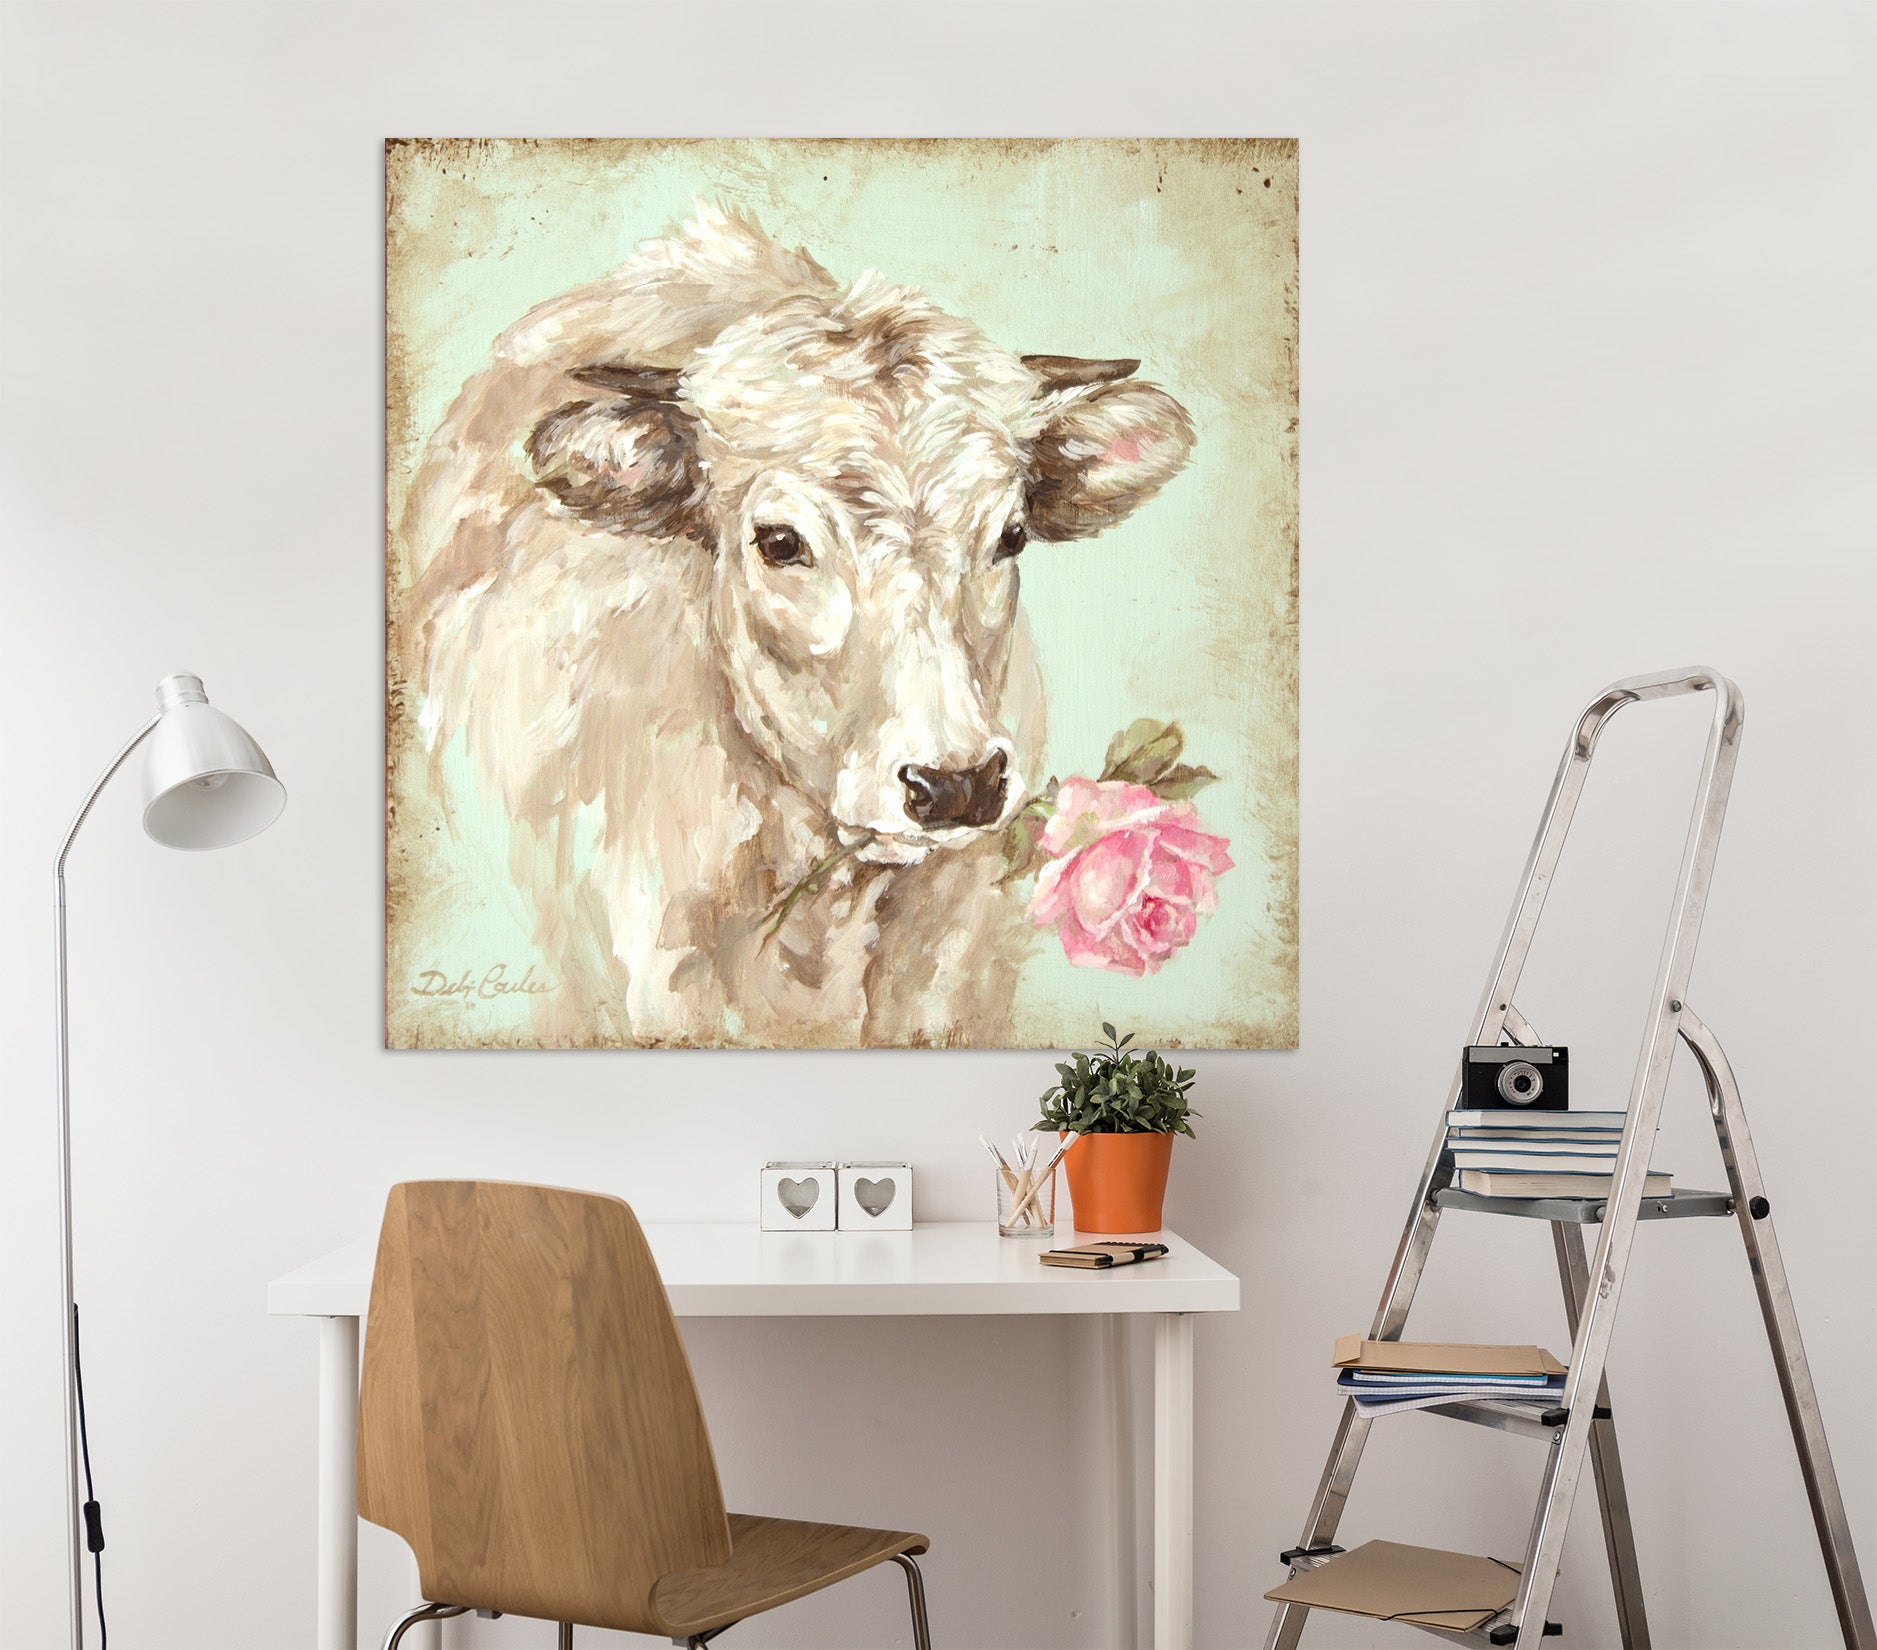 3D Pink Rose Cow 057 Debi Coules Wall Sticker